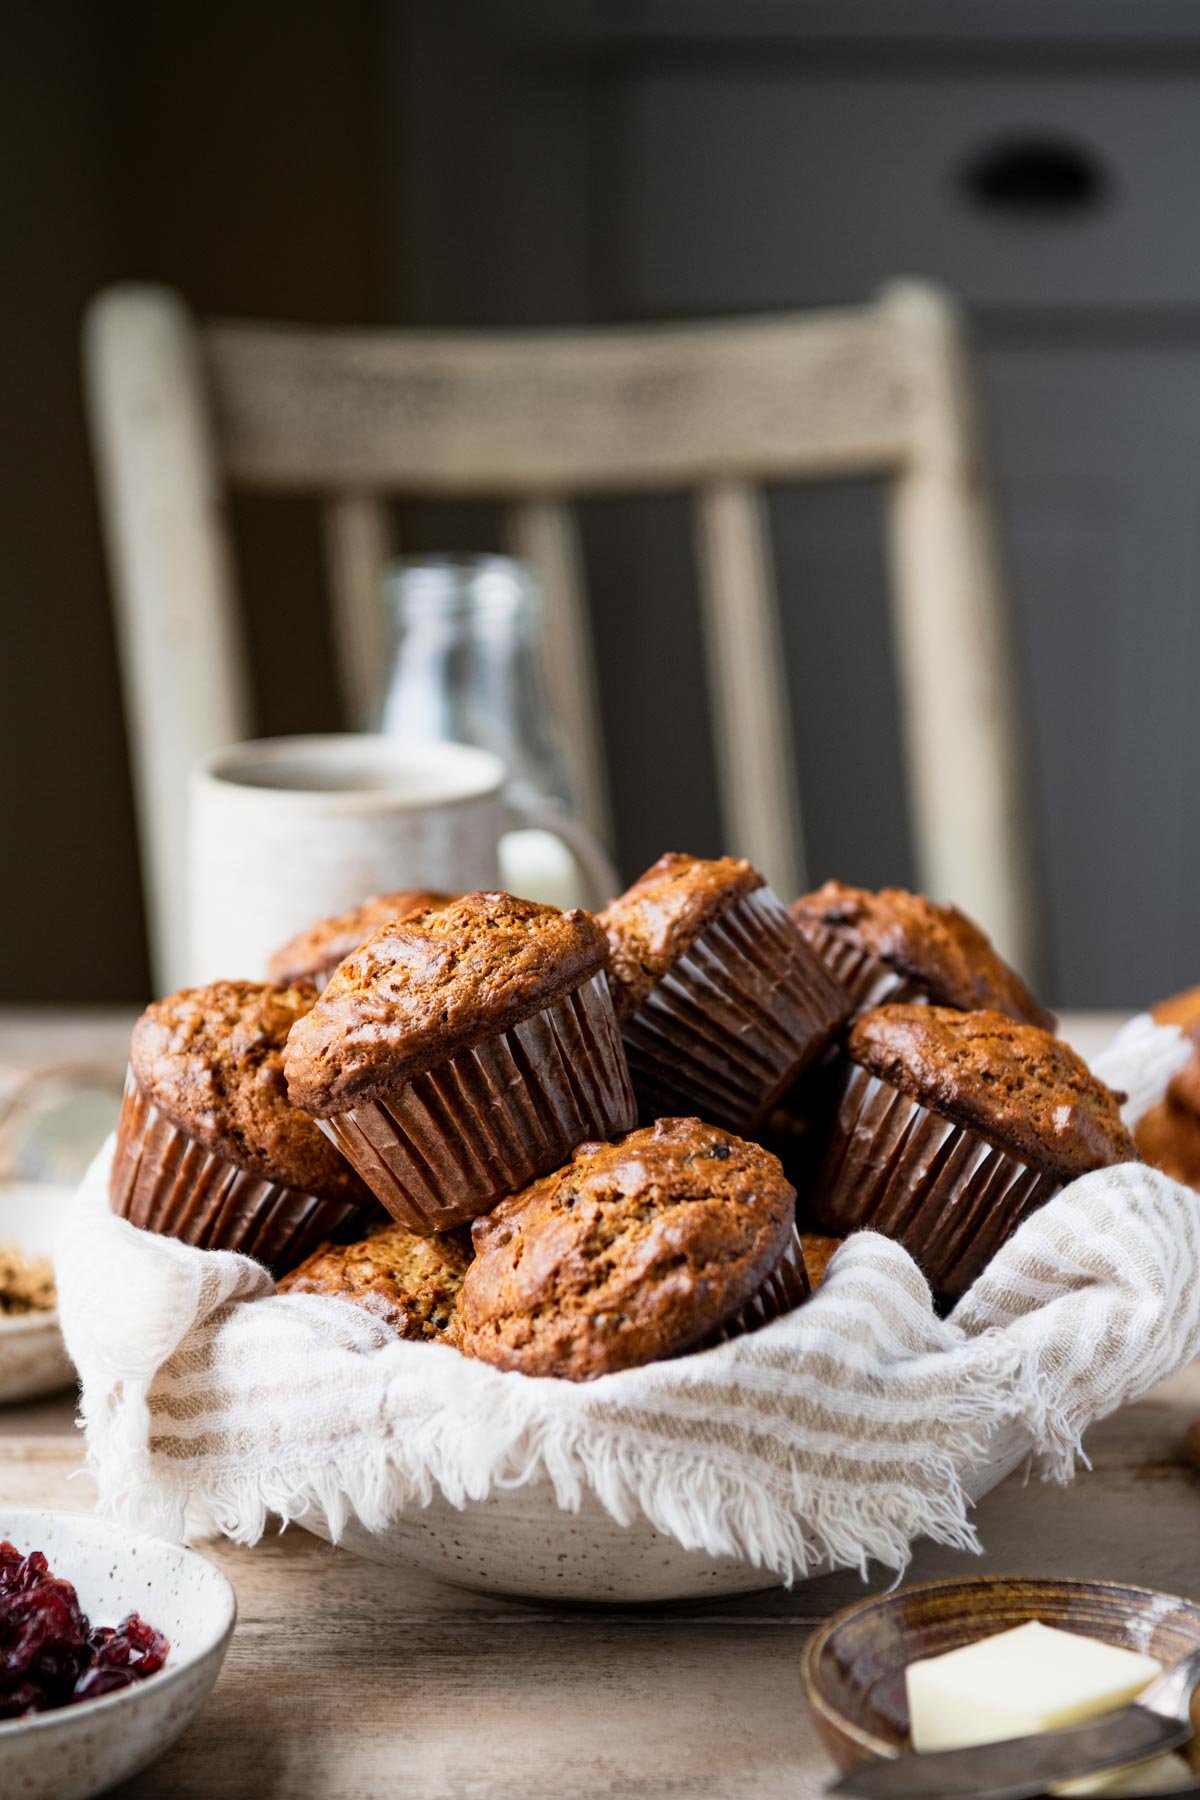 Basket of the best bran muffin recipe served on a breakfast table